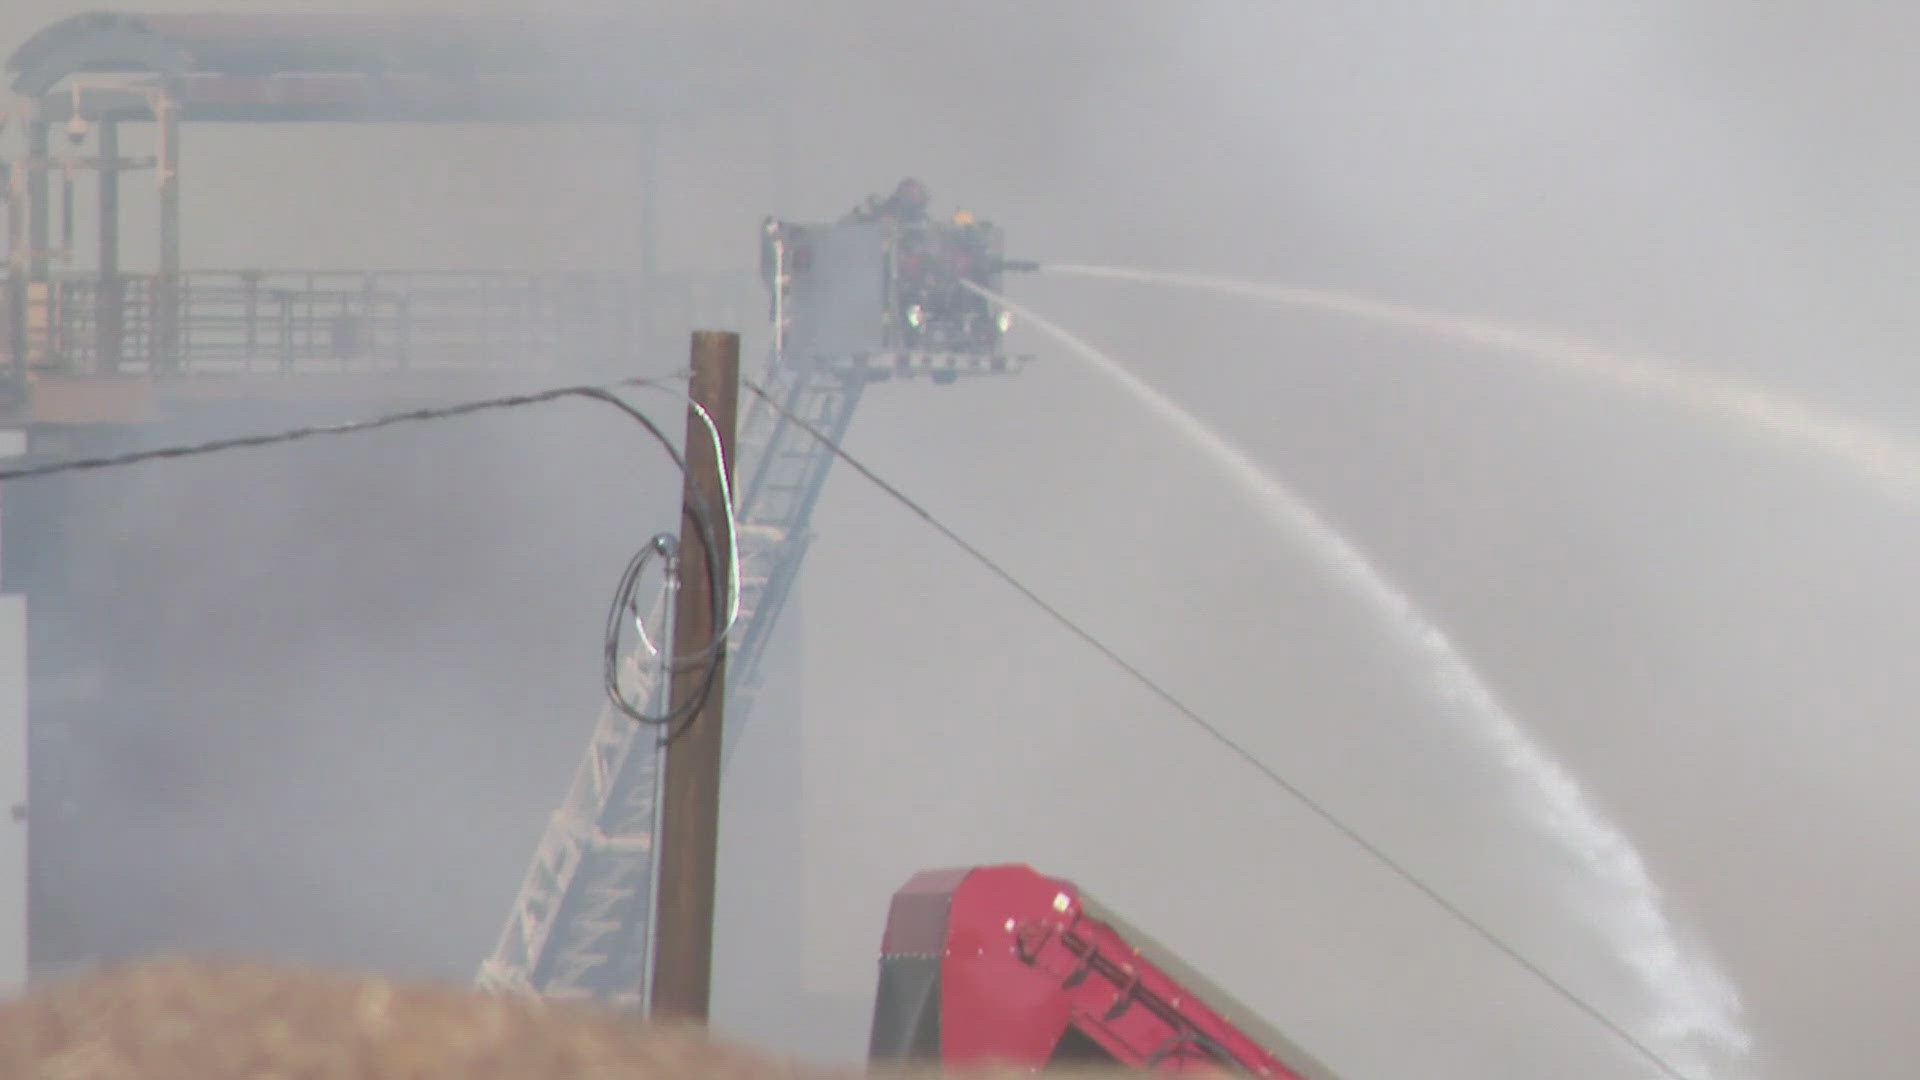 The fire department said the fire broke out Sunday afternoon near 27th Avenue and Lower Buckeye Road.